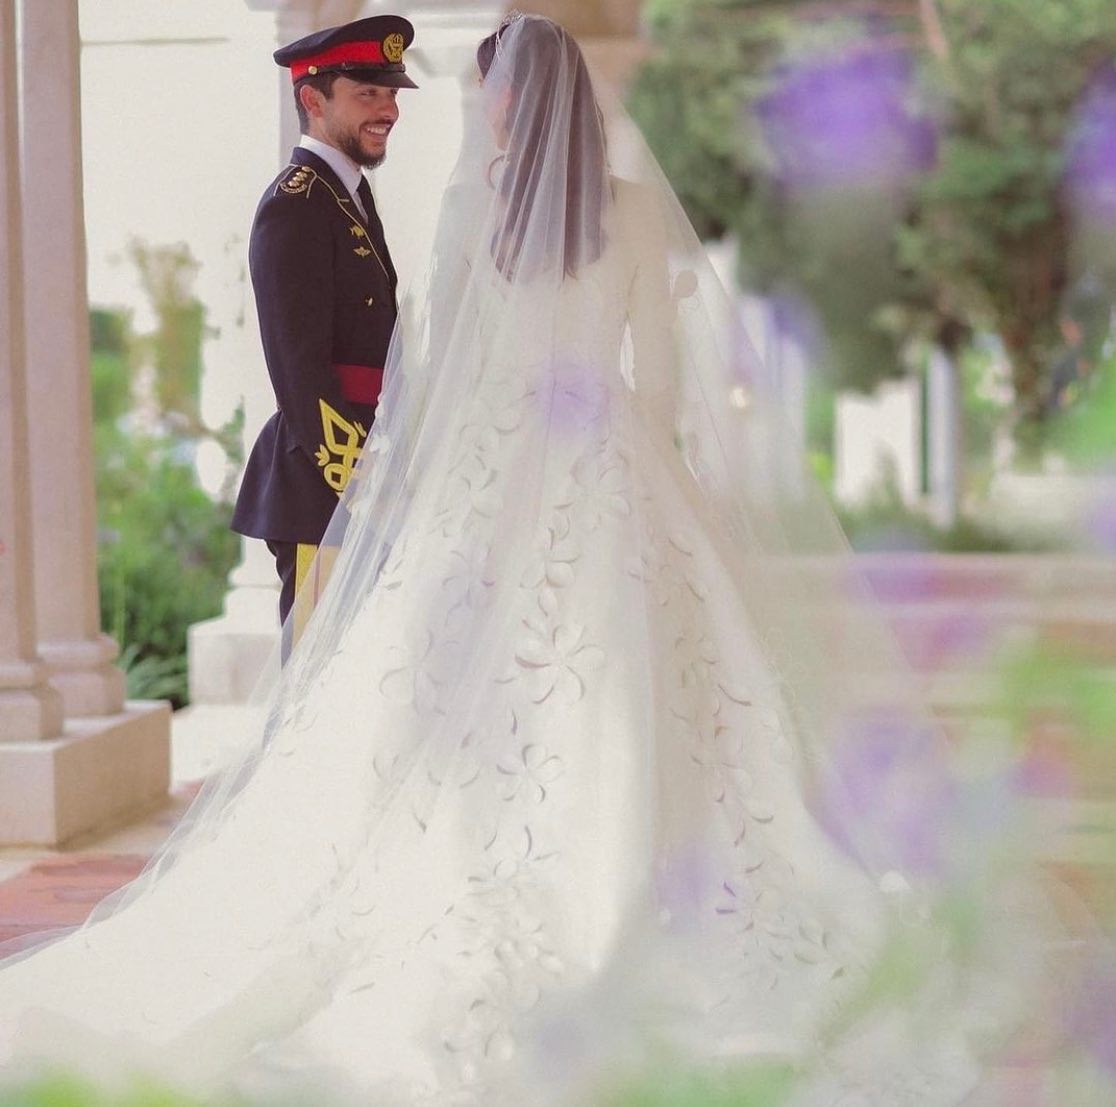 All The Inside Details About The Jordan Royal Wedding!